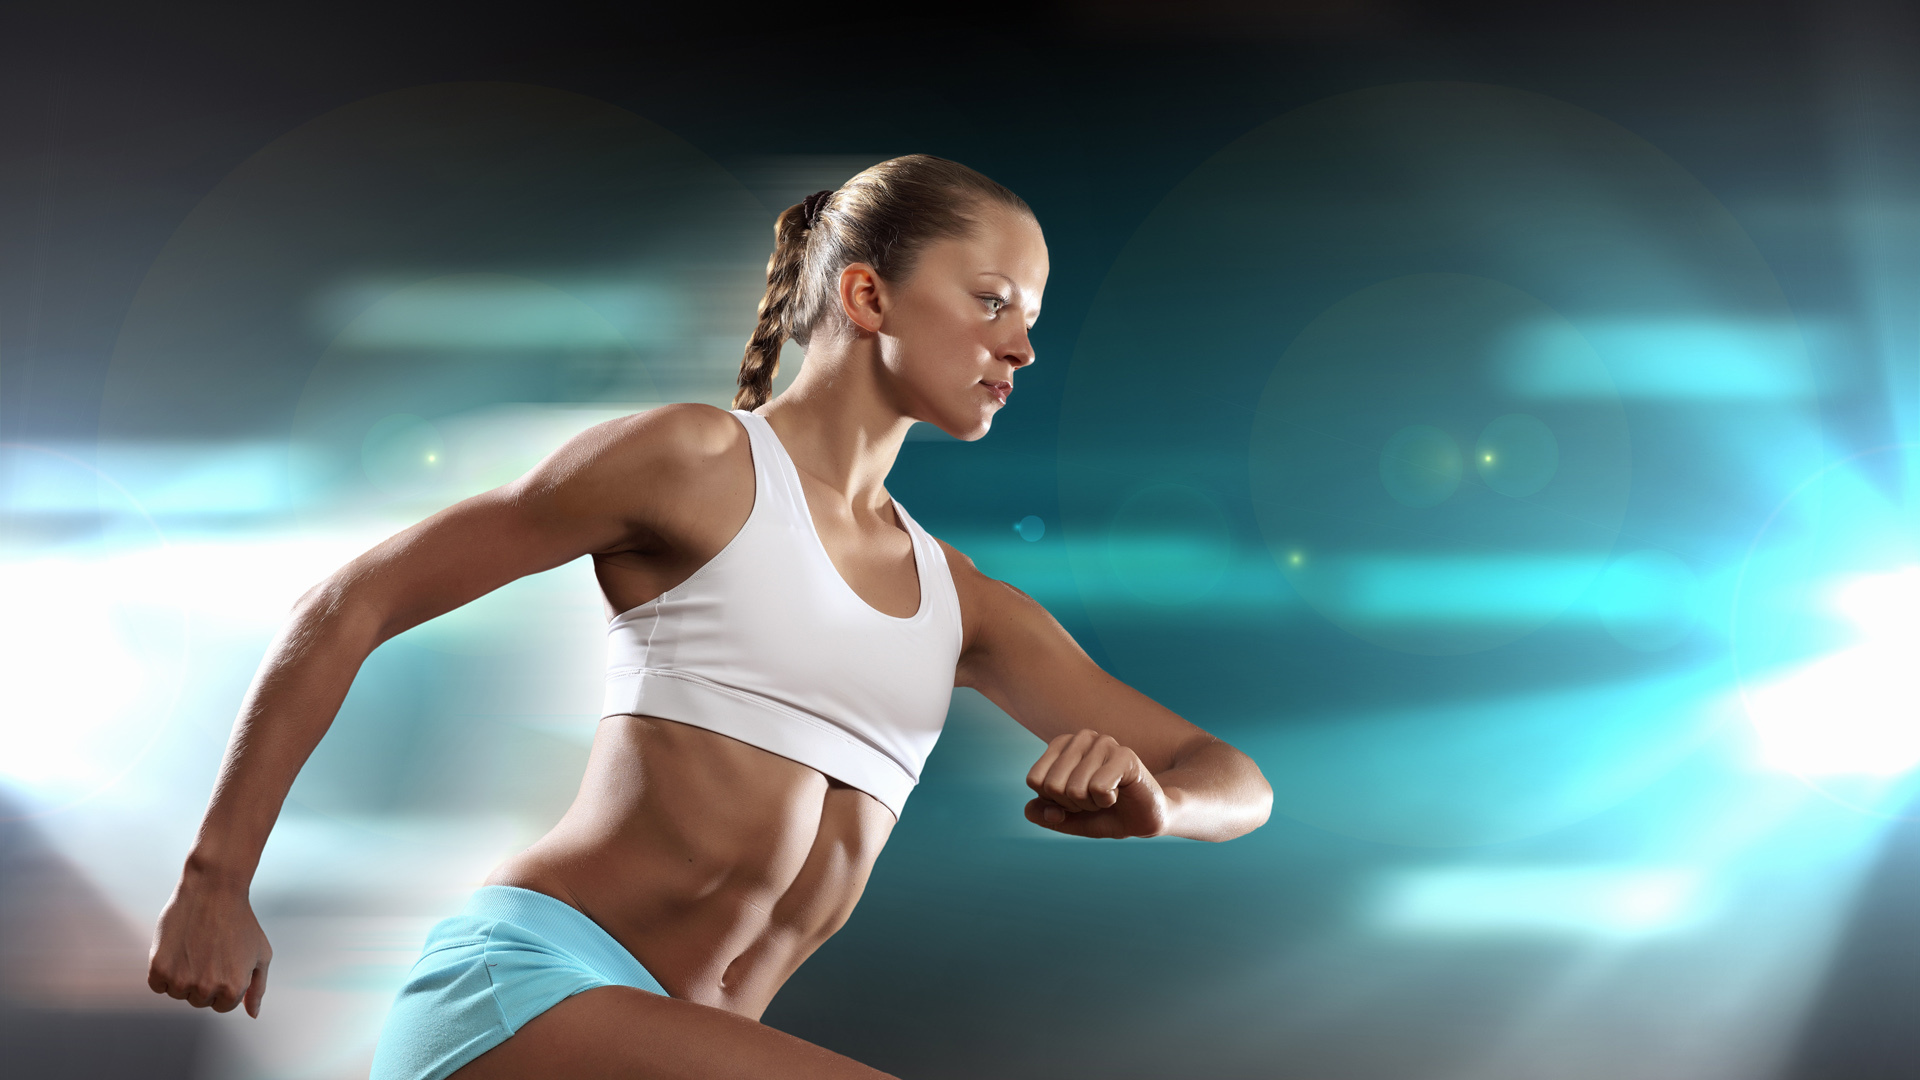 Fitness Woman Wallpaper And Image Pictures Photos